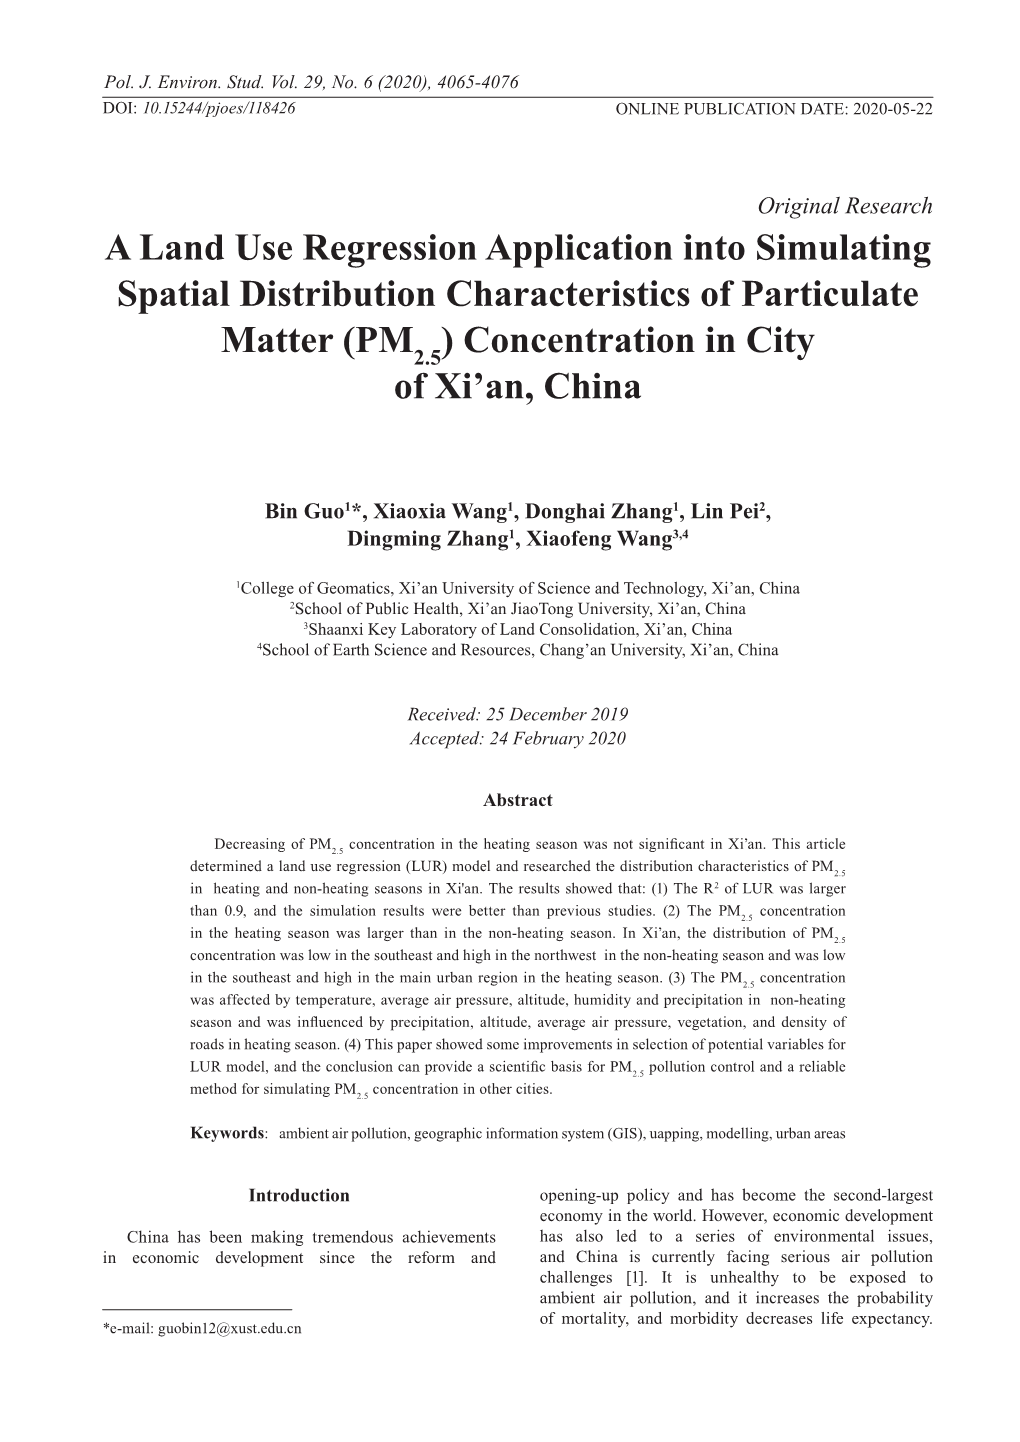 A Land Use Regression Application Into Simulating Spatial Distribution Characteristics of Particulate